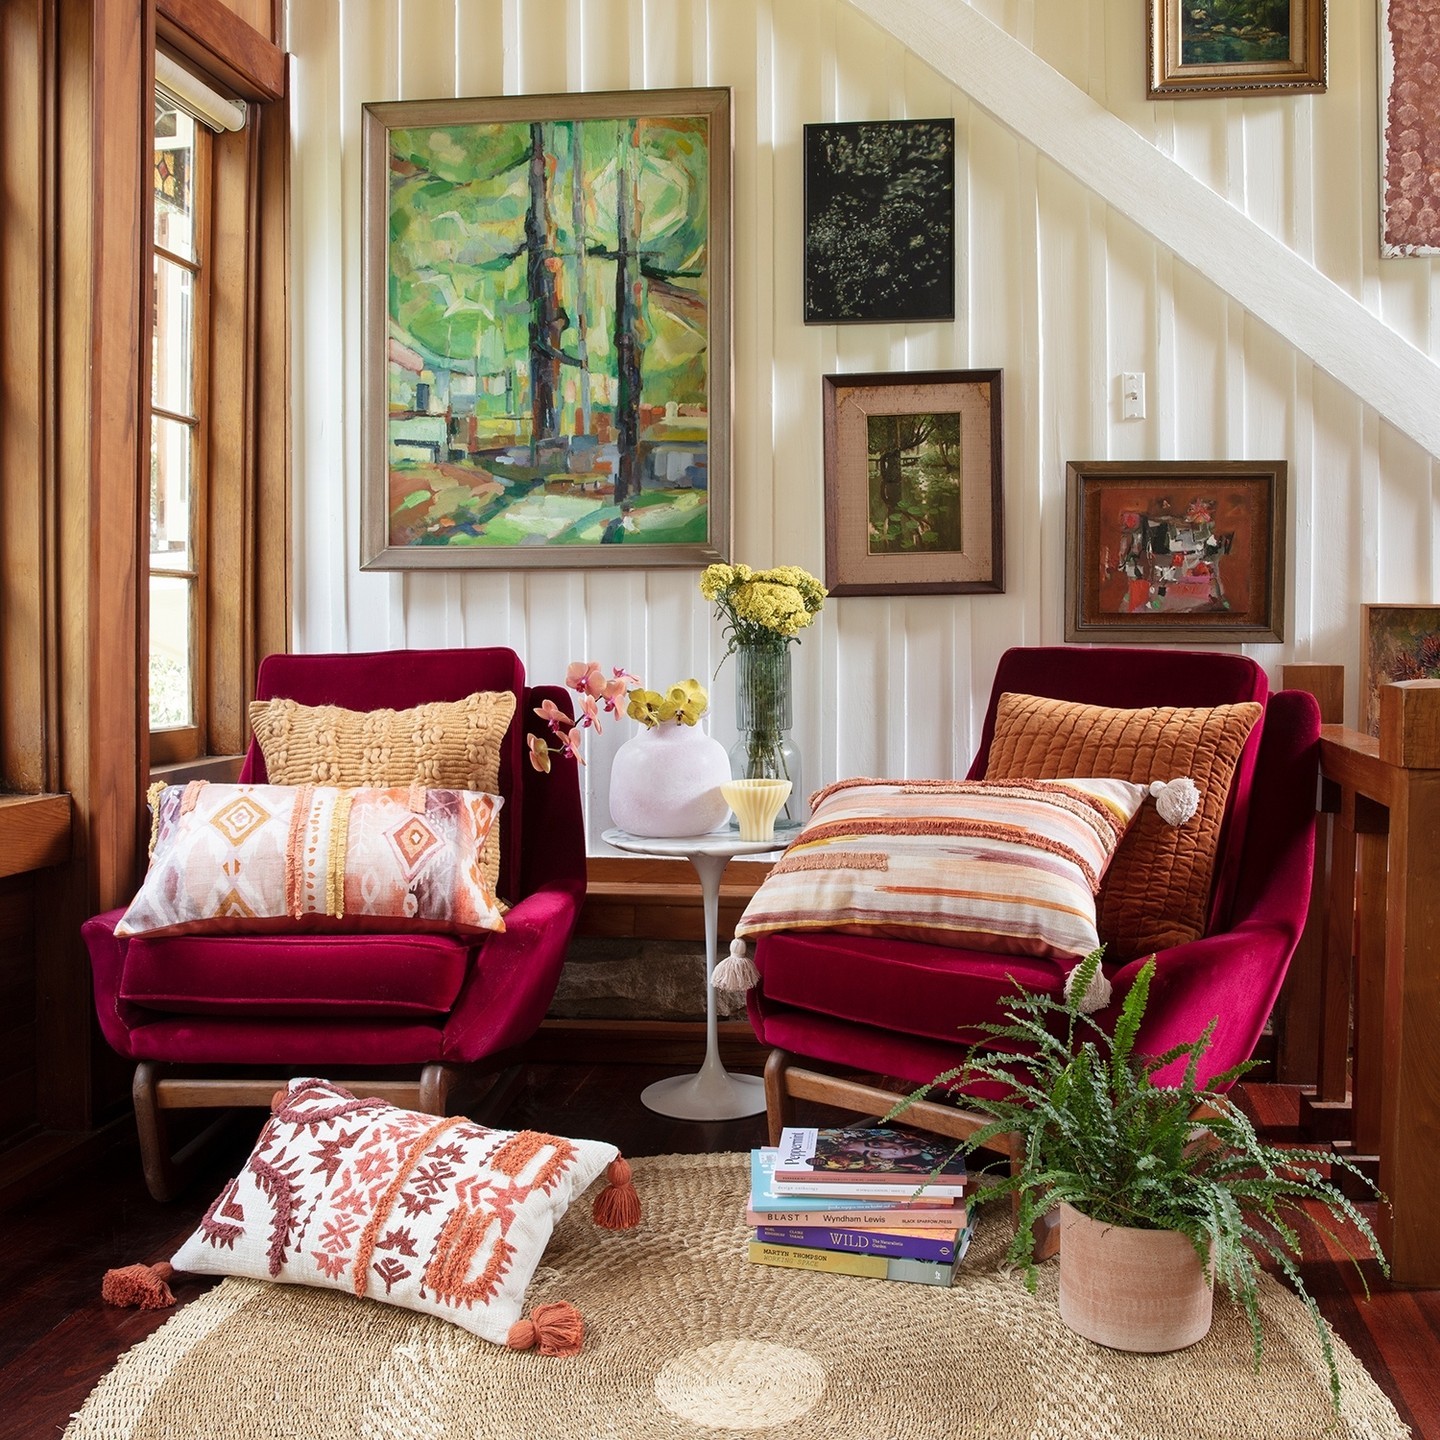 Bohemian Chic: How to style with Bohemian Pillows